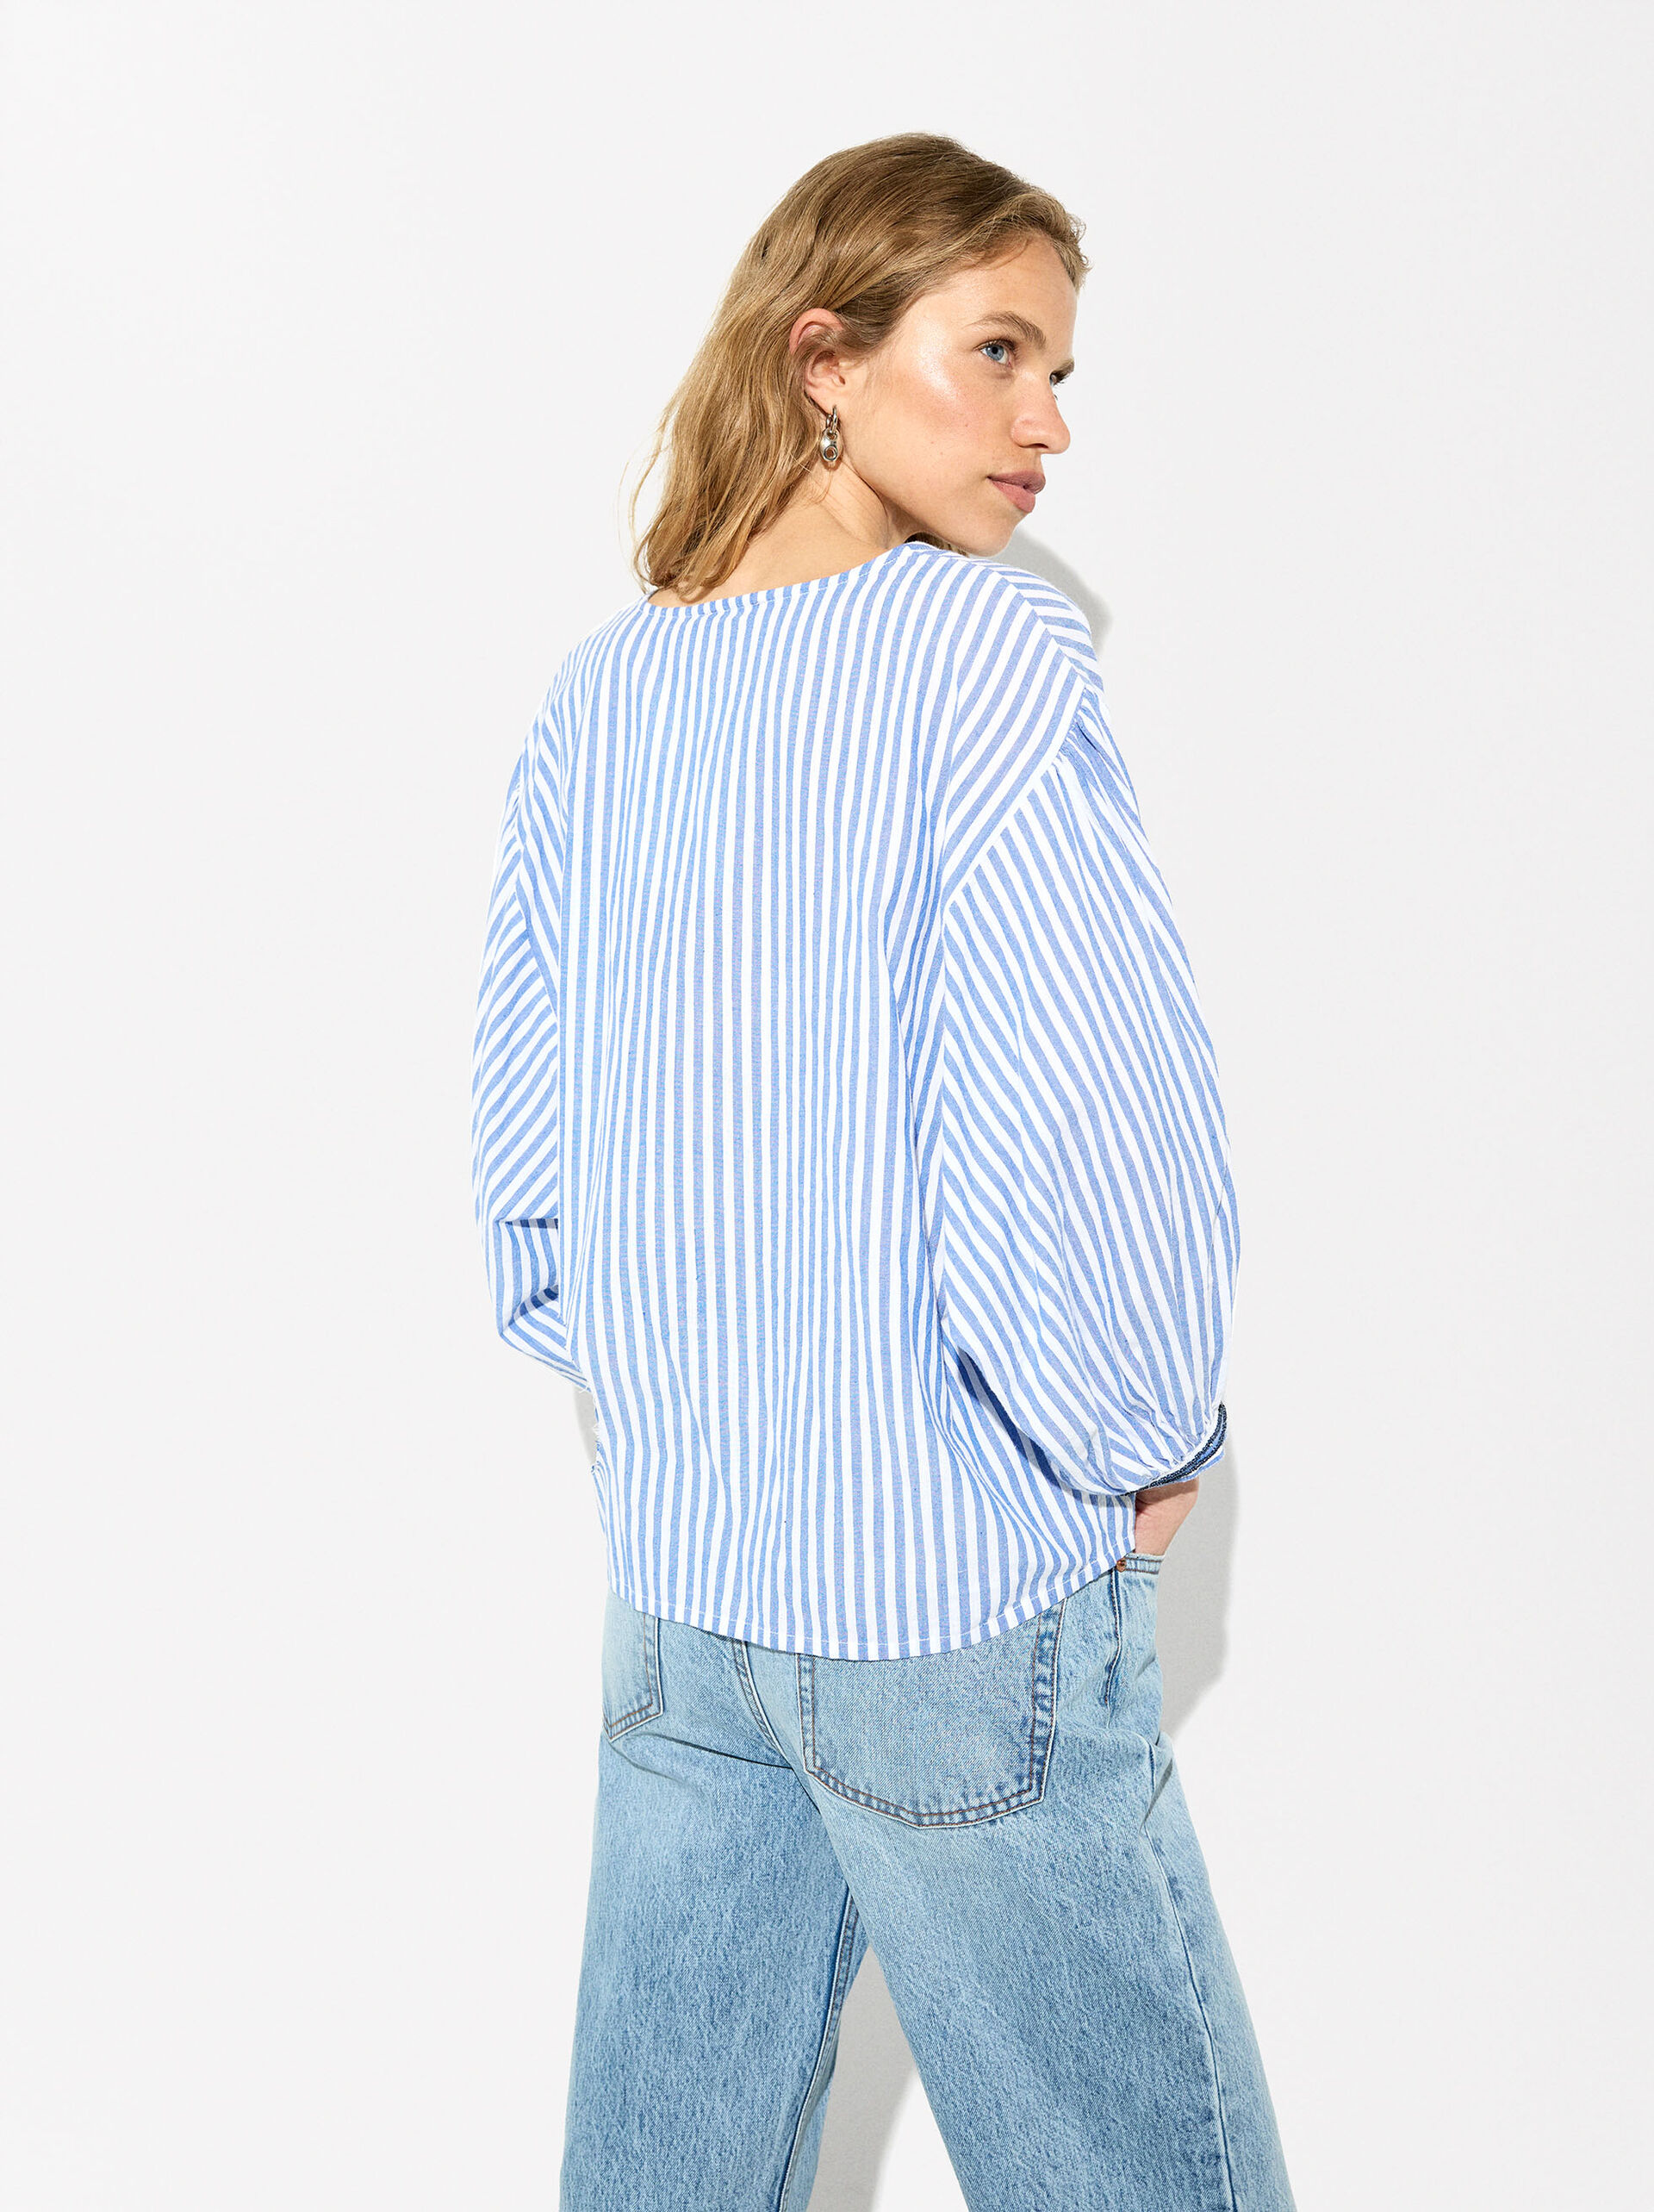 100% Cotton Striped Shirt image number 3.0